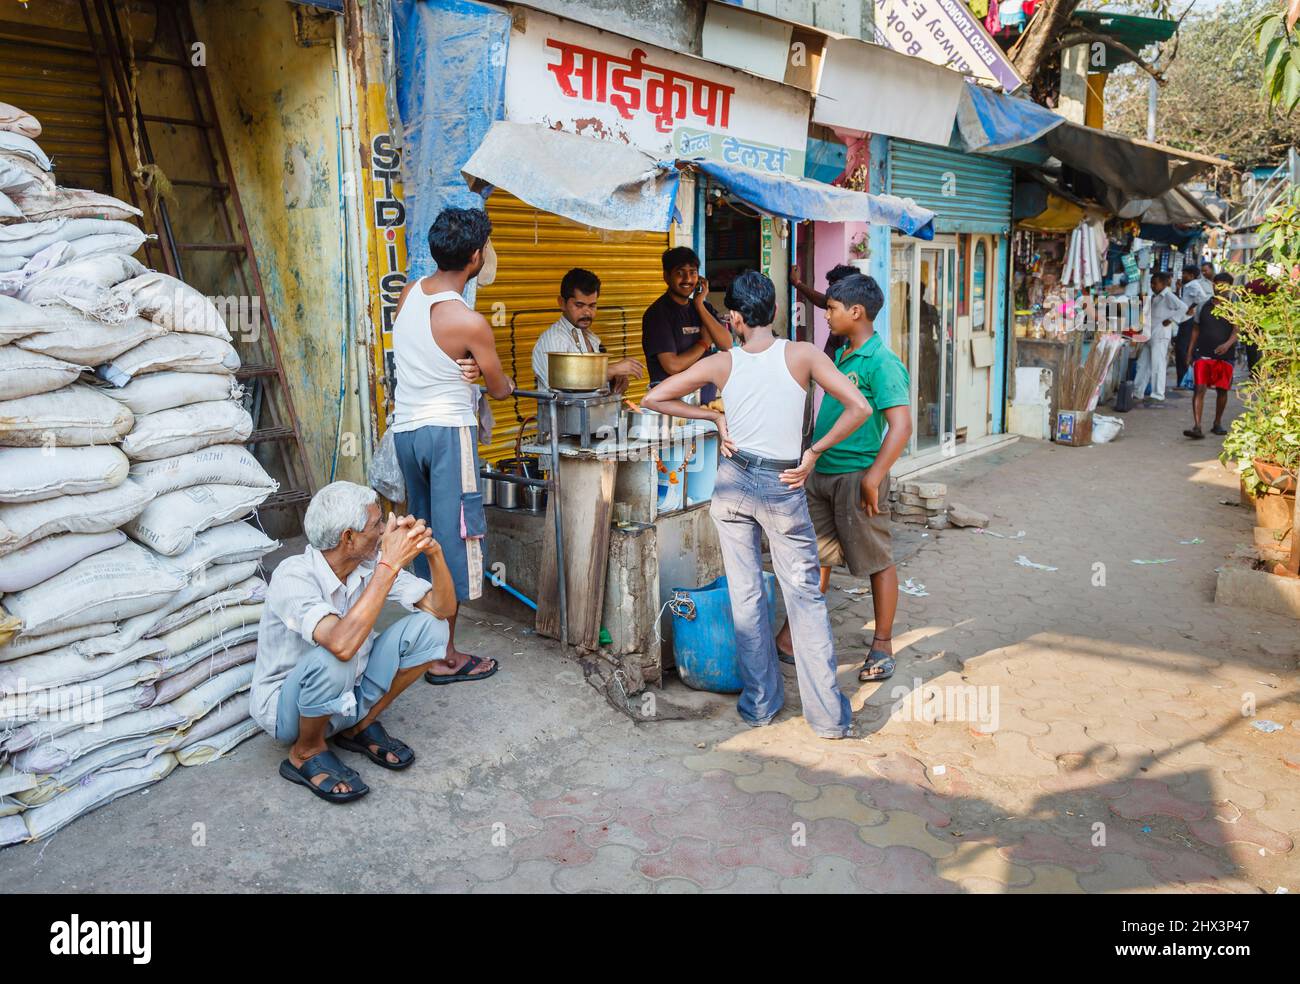 Local men gather round a street food seller and a man squats beside food sacks outside Mahalaxmi Dhobi Ghat, a large open air laundry in Mumbai, India Stock Photo